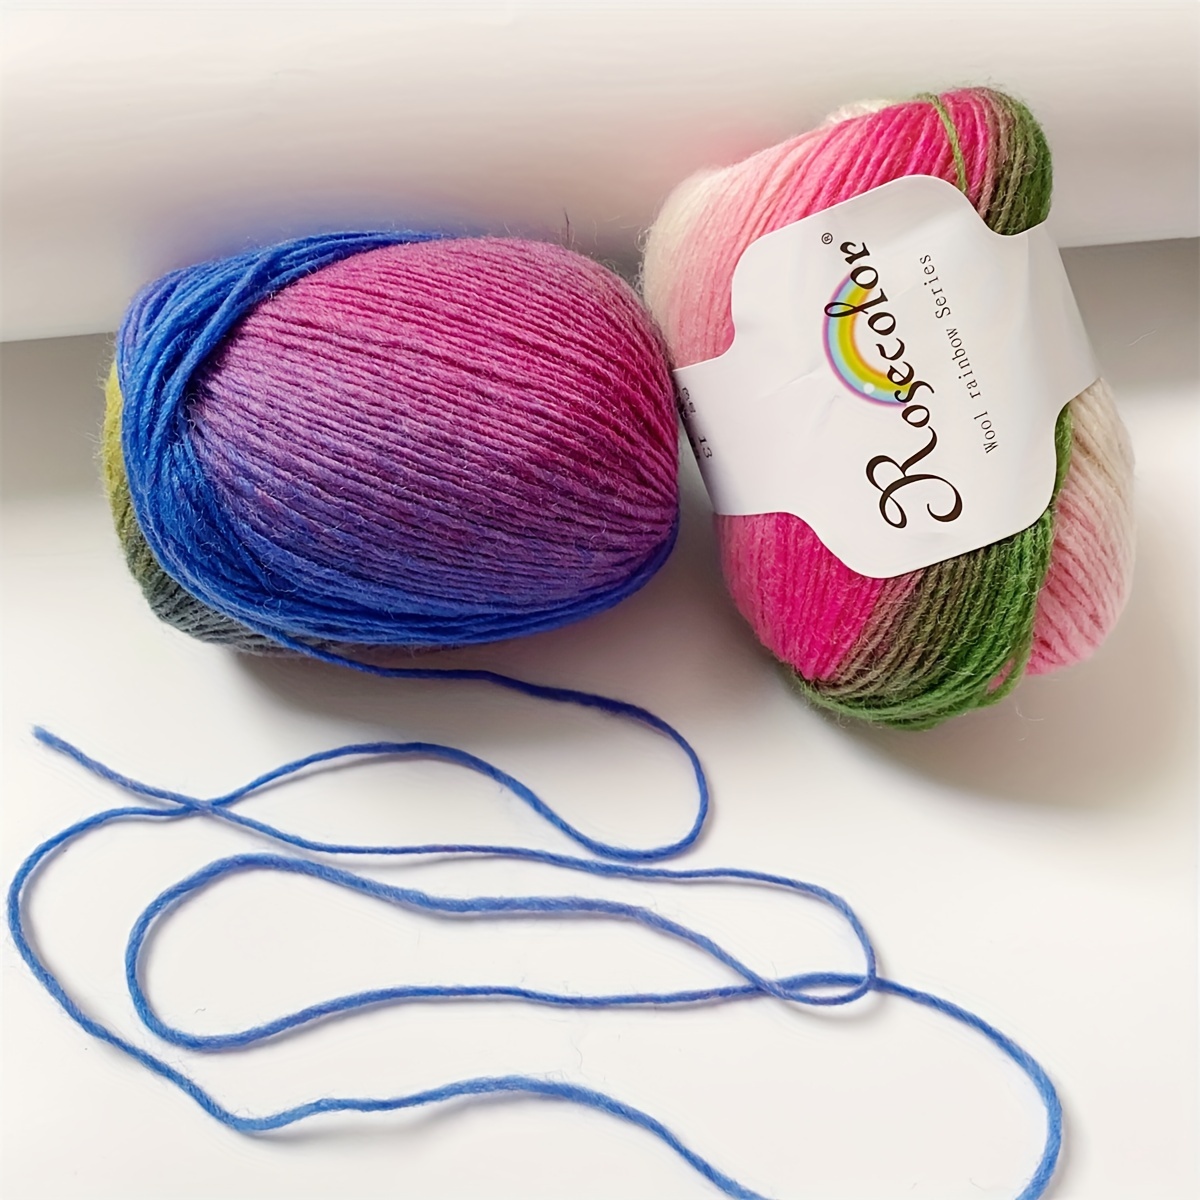 Cashmere Yarn for Knitting Hand-woven for